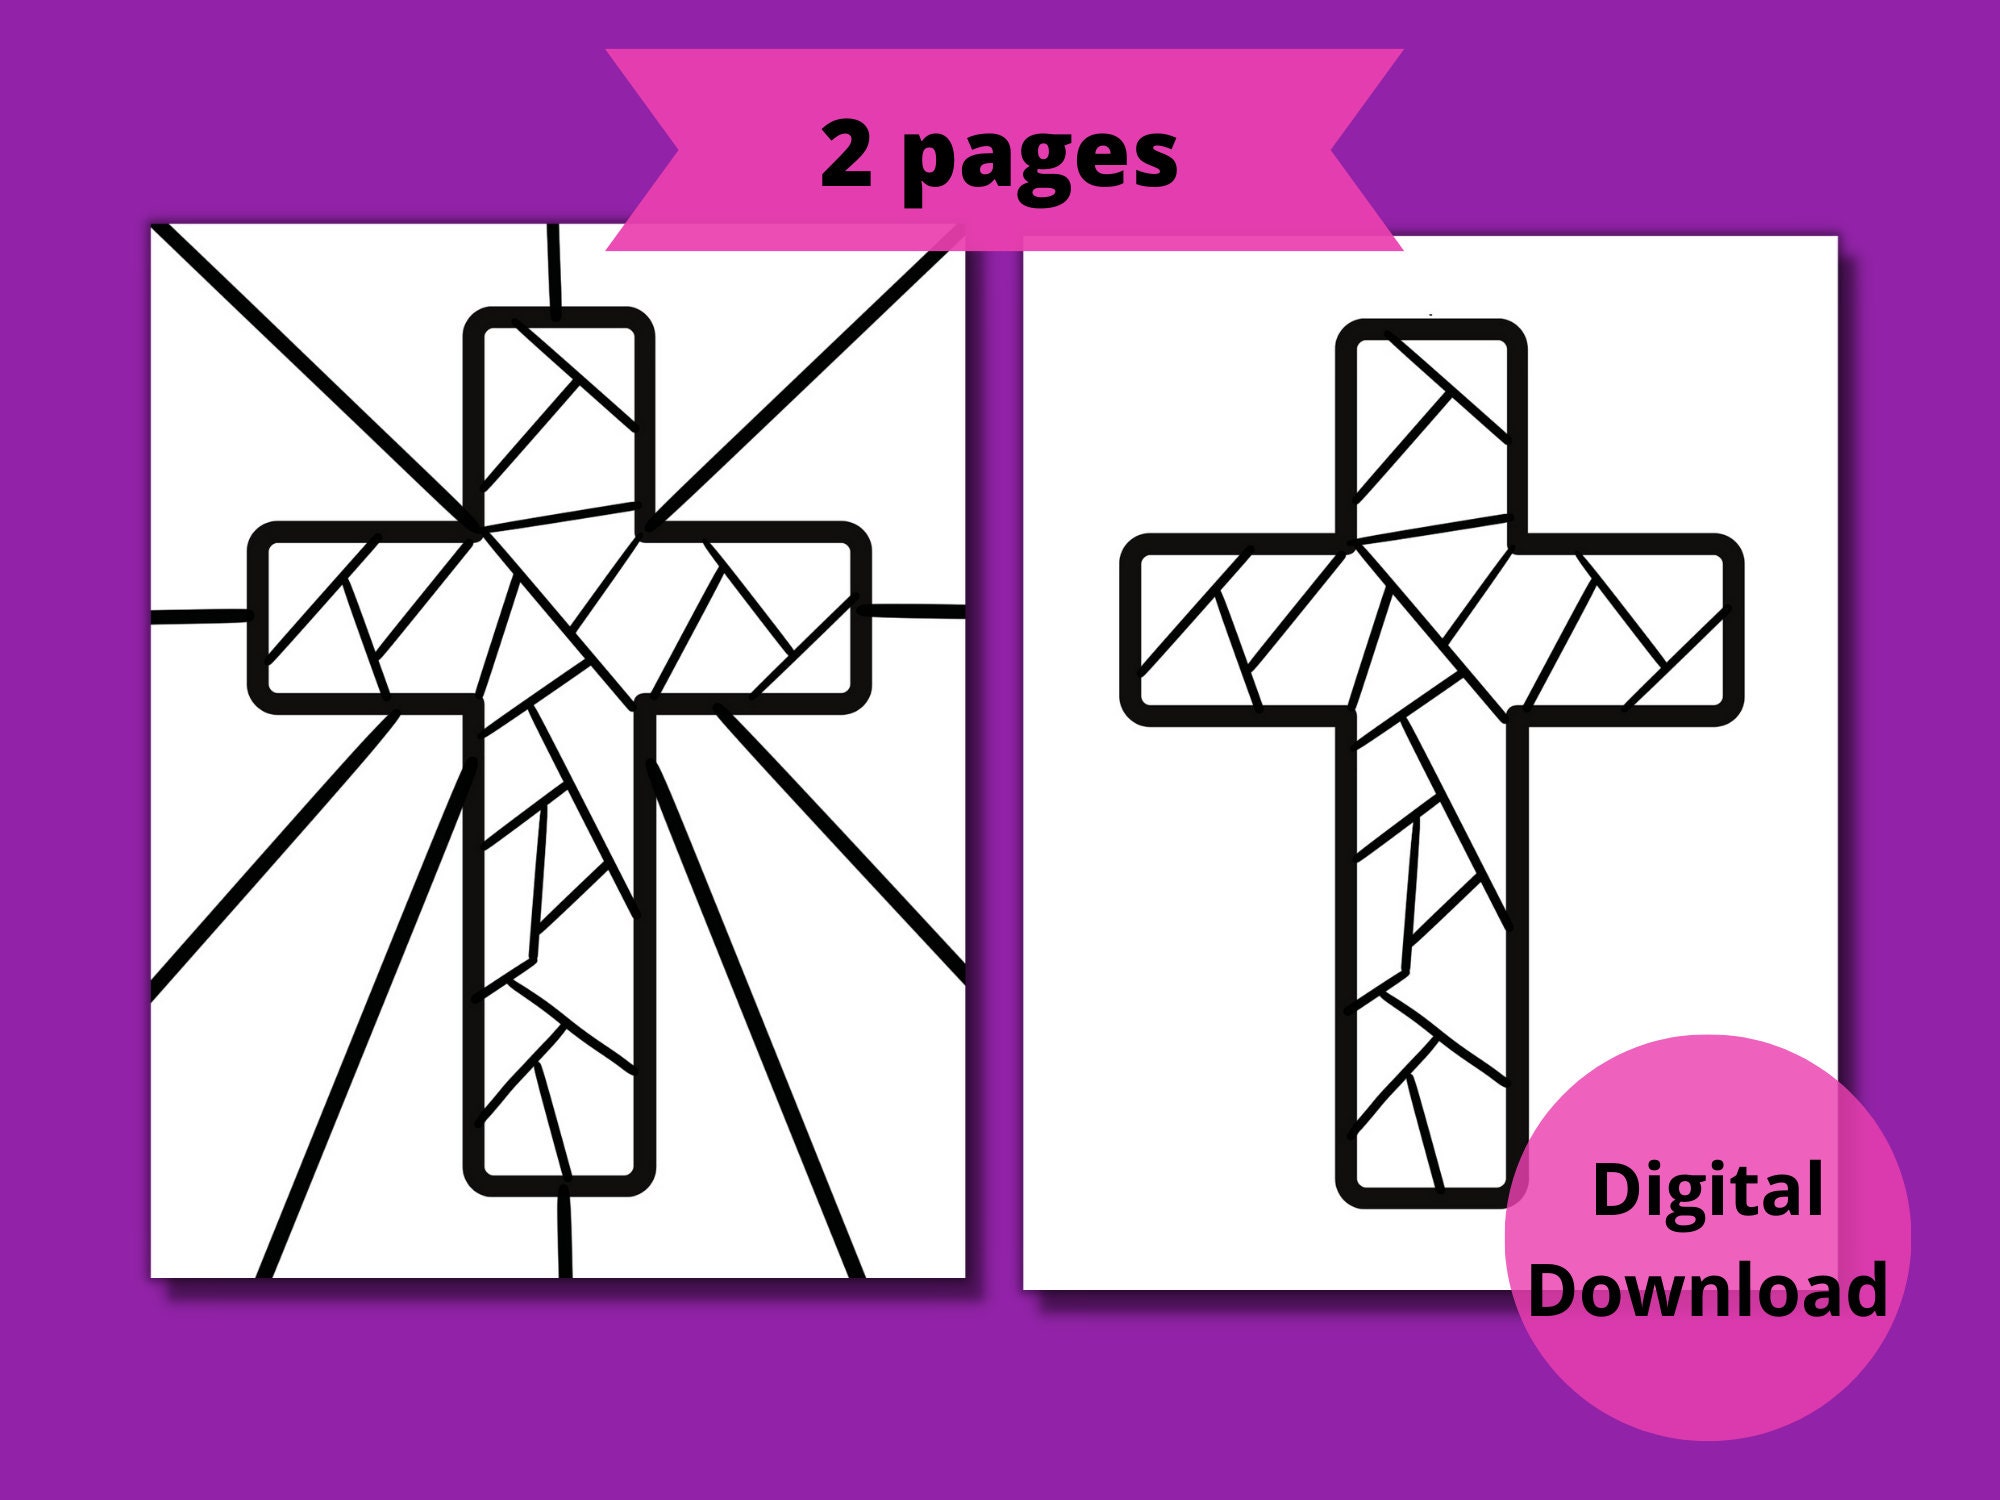 Stain glass cross coloring printable lent easter christian catholic sunday school homeschool set of printables download now